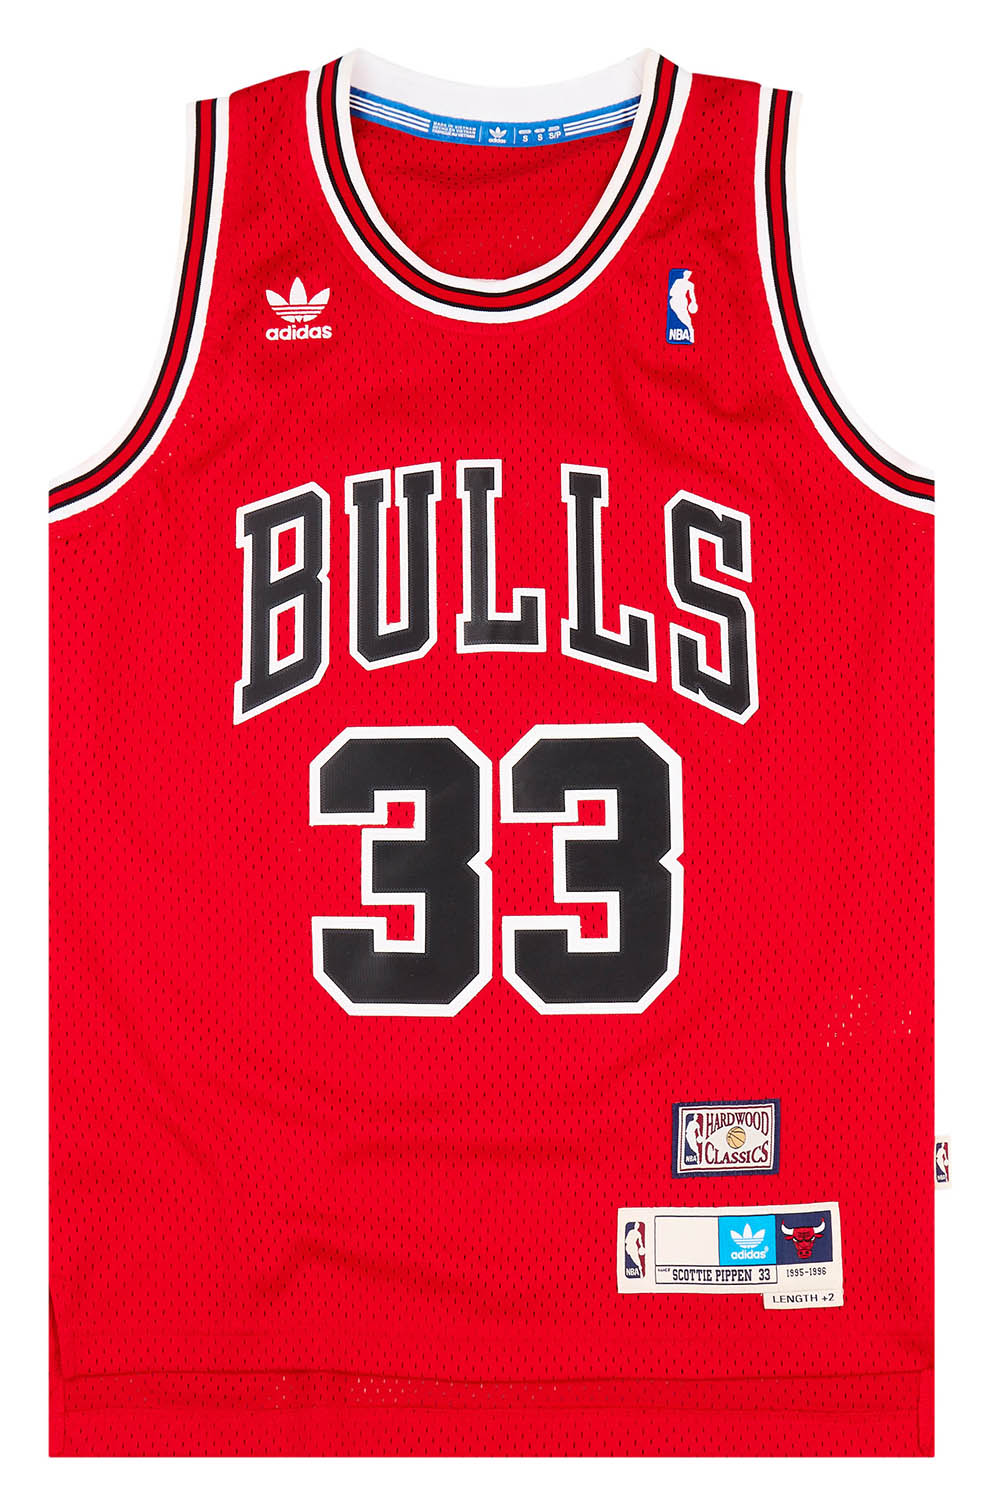 Eastern Conference All-Stars 1995-1996 Home Jersey